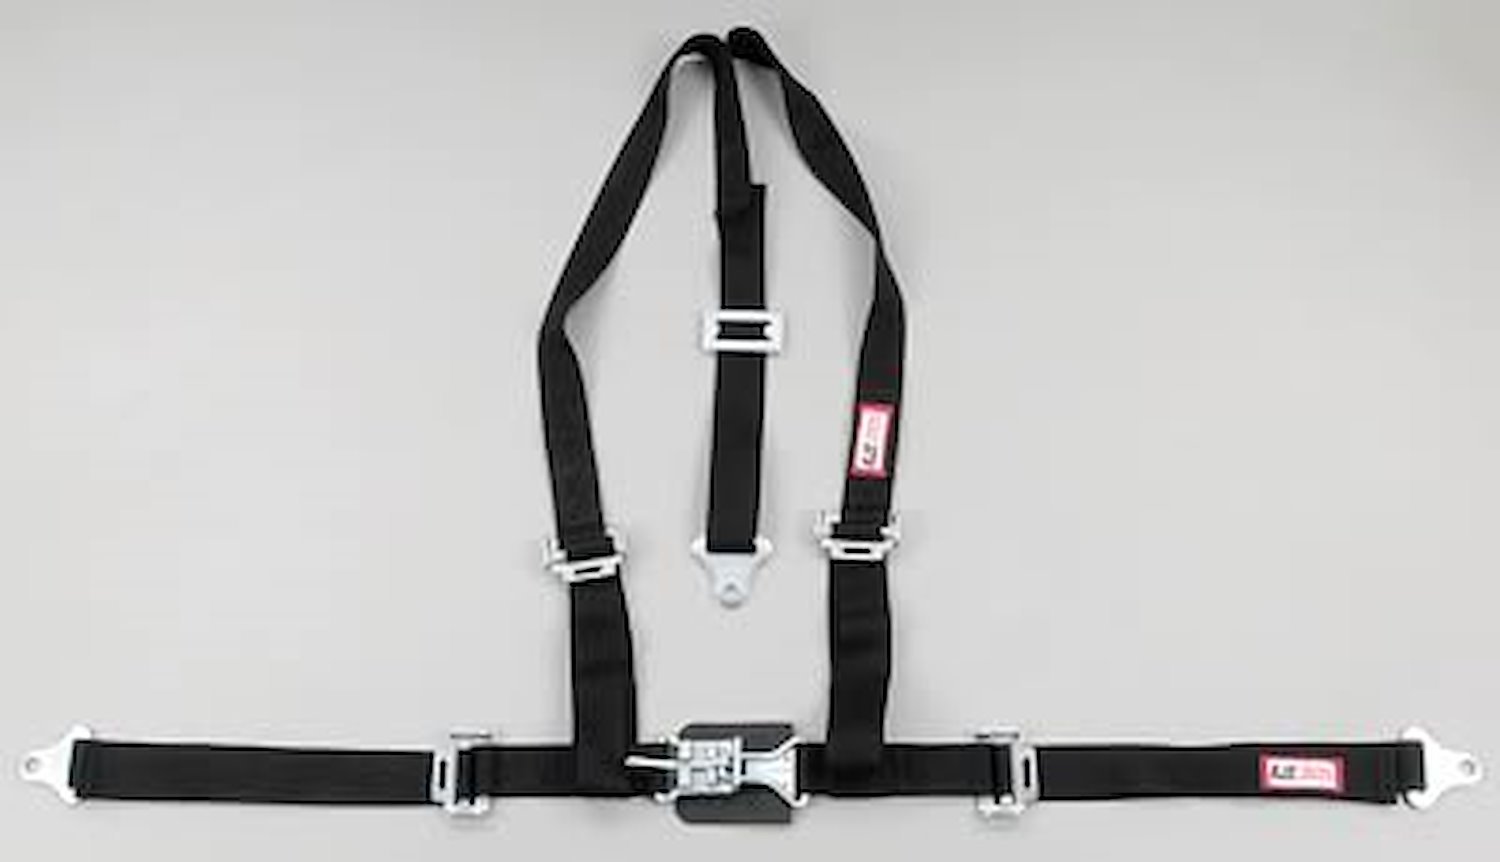 NON-SFI L&L HARNESS 3 PULL UP Lap Belt SNAP SEWN IN 2 S.H. Individual FLOOR Mount WRAP/BOLT YELLOW